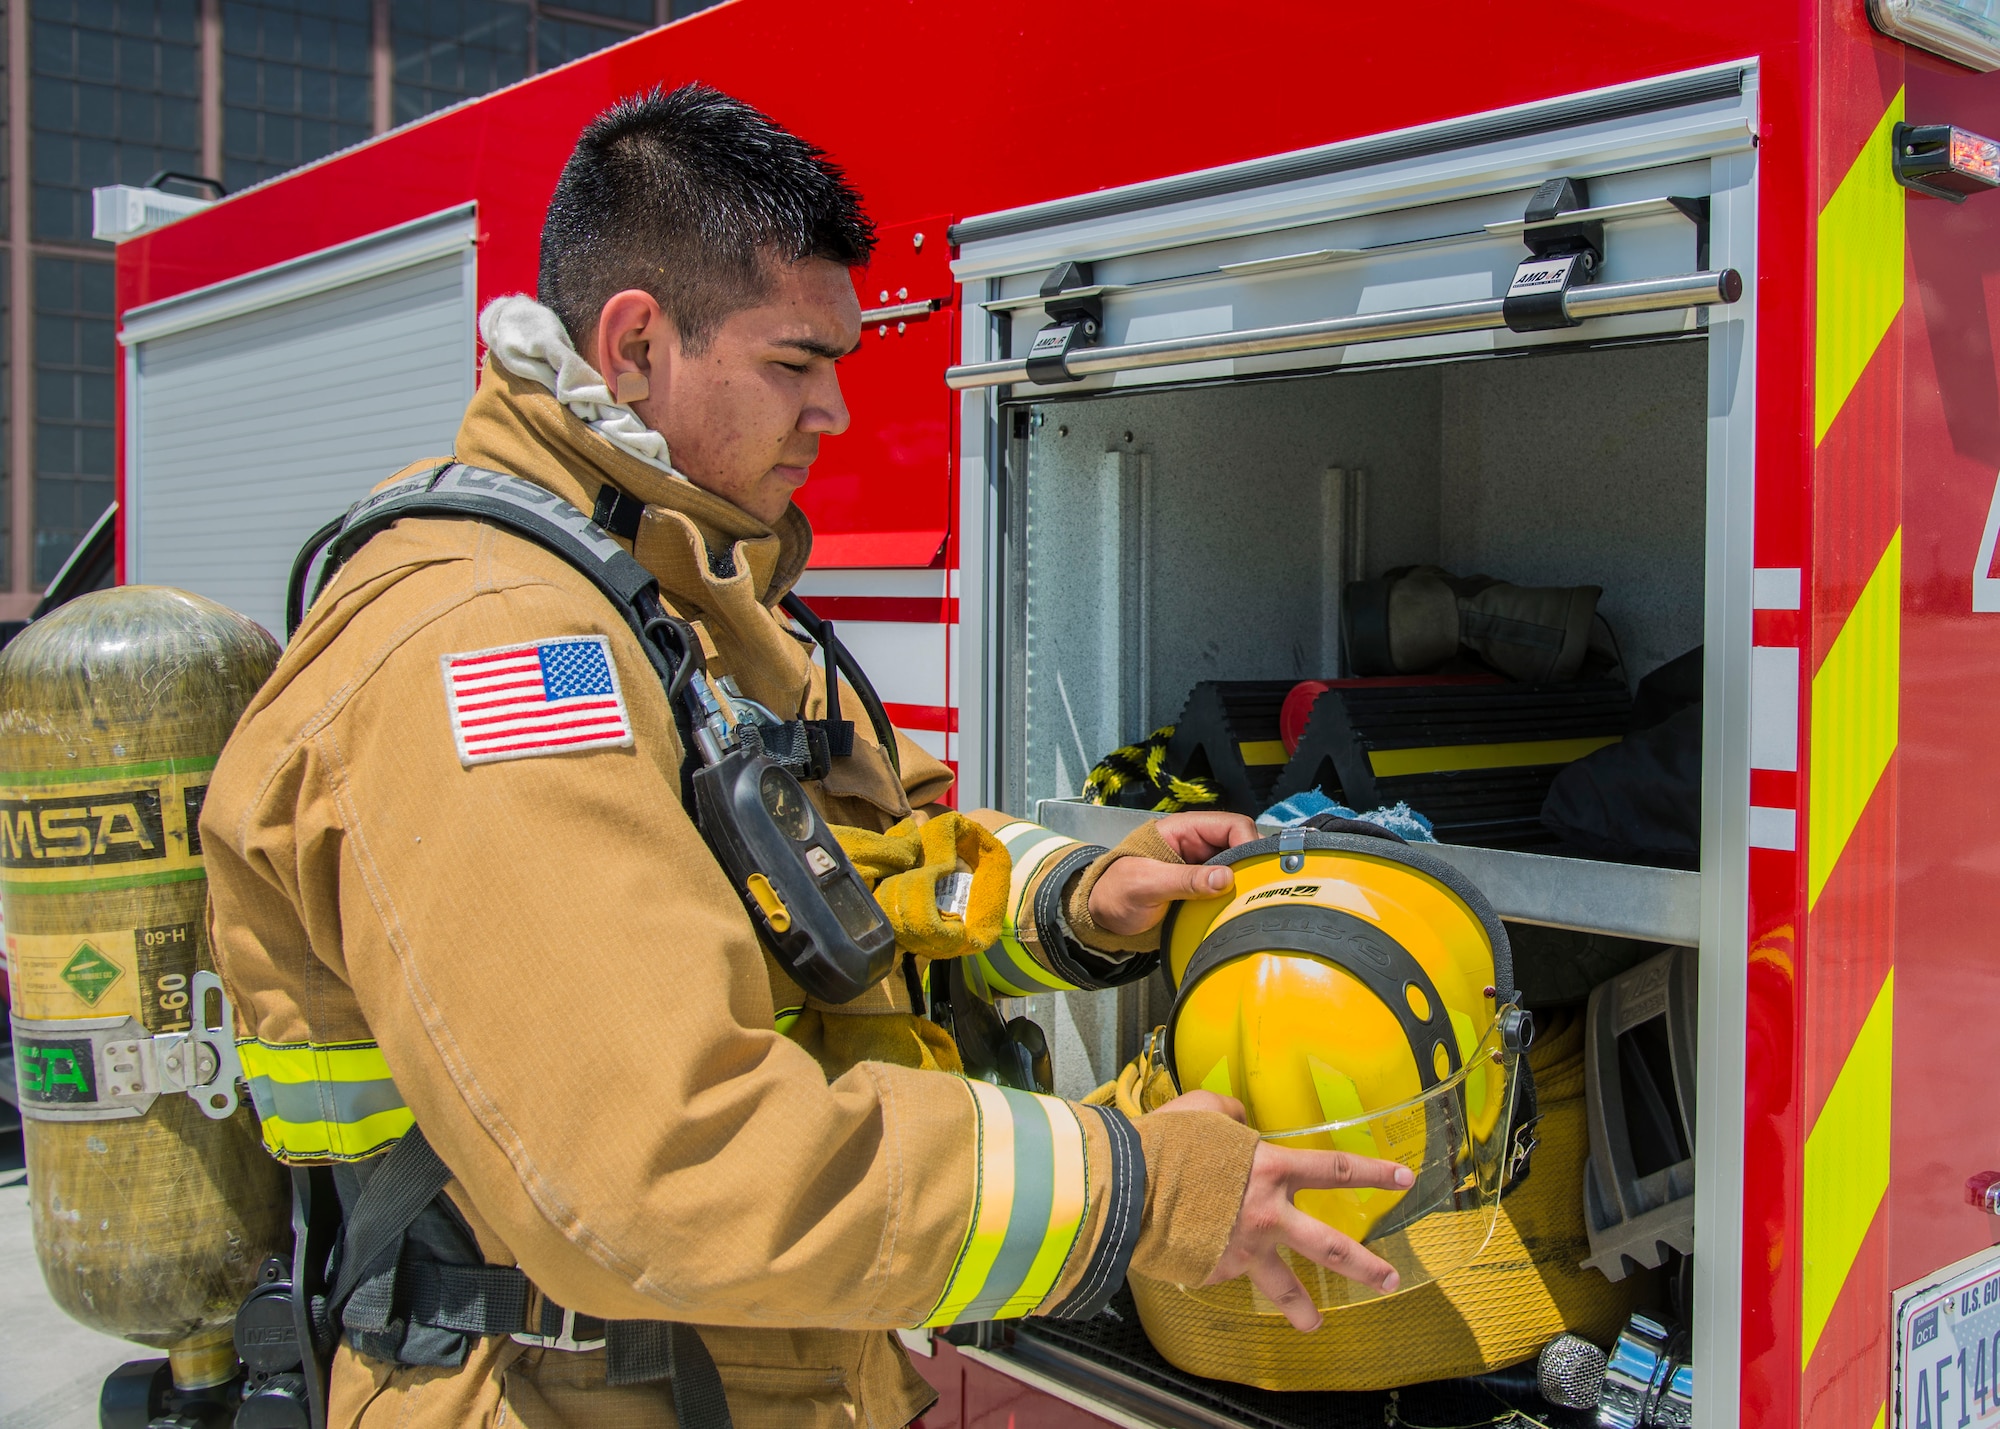 Airman 1st Class Macario Martinez, 375th CES fire fighter, grabs his helmet to participate in a training exercise at Scott Air Force Base, Ill. on June 22, 2017. The exercise was part of the unit's Airport Rescue and Fire Fighting's training which tests their ability to arrive on scene, fight fires, and provide a rescue path as well as recover or rescue personnel. (U.S. Air Force photo by Airman 1st Class Daniel Garcia)